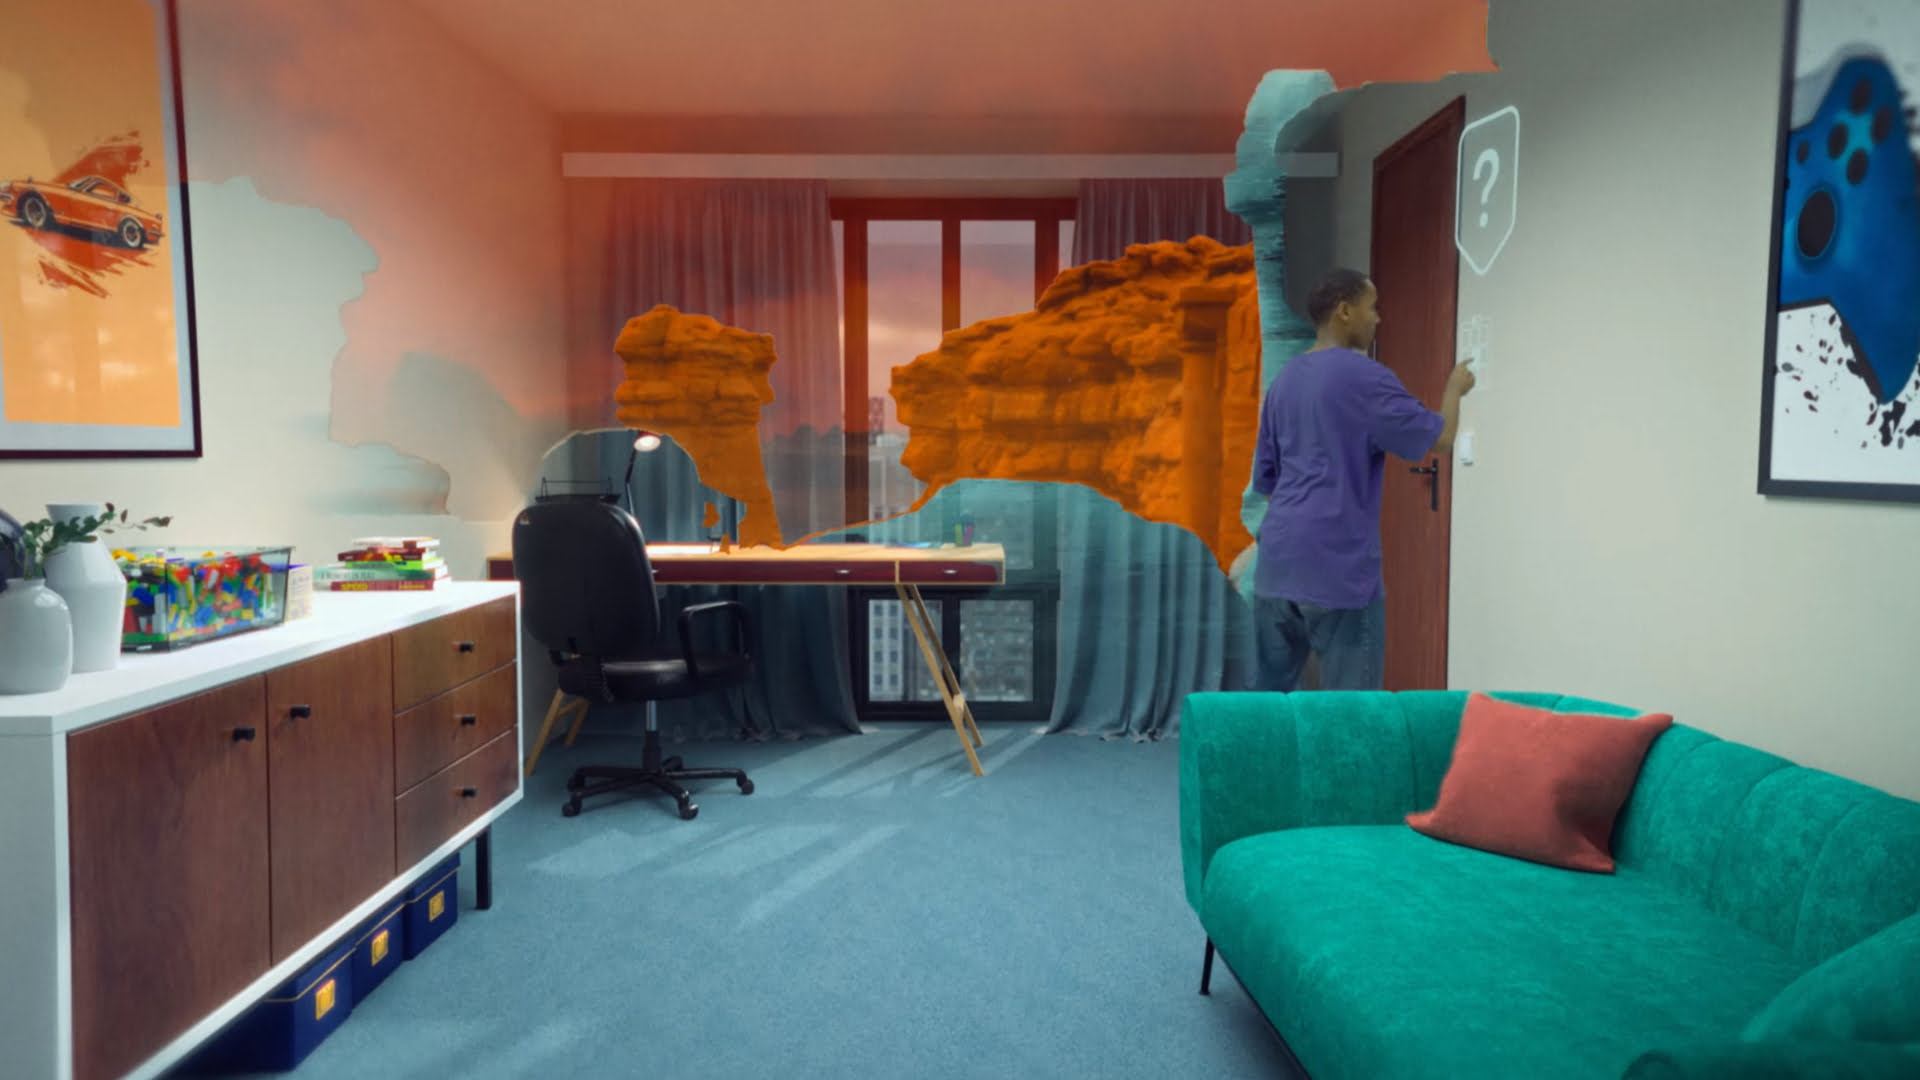 SyncReality wants to create "house-sized" VR gaming spaces for Quest 2